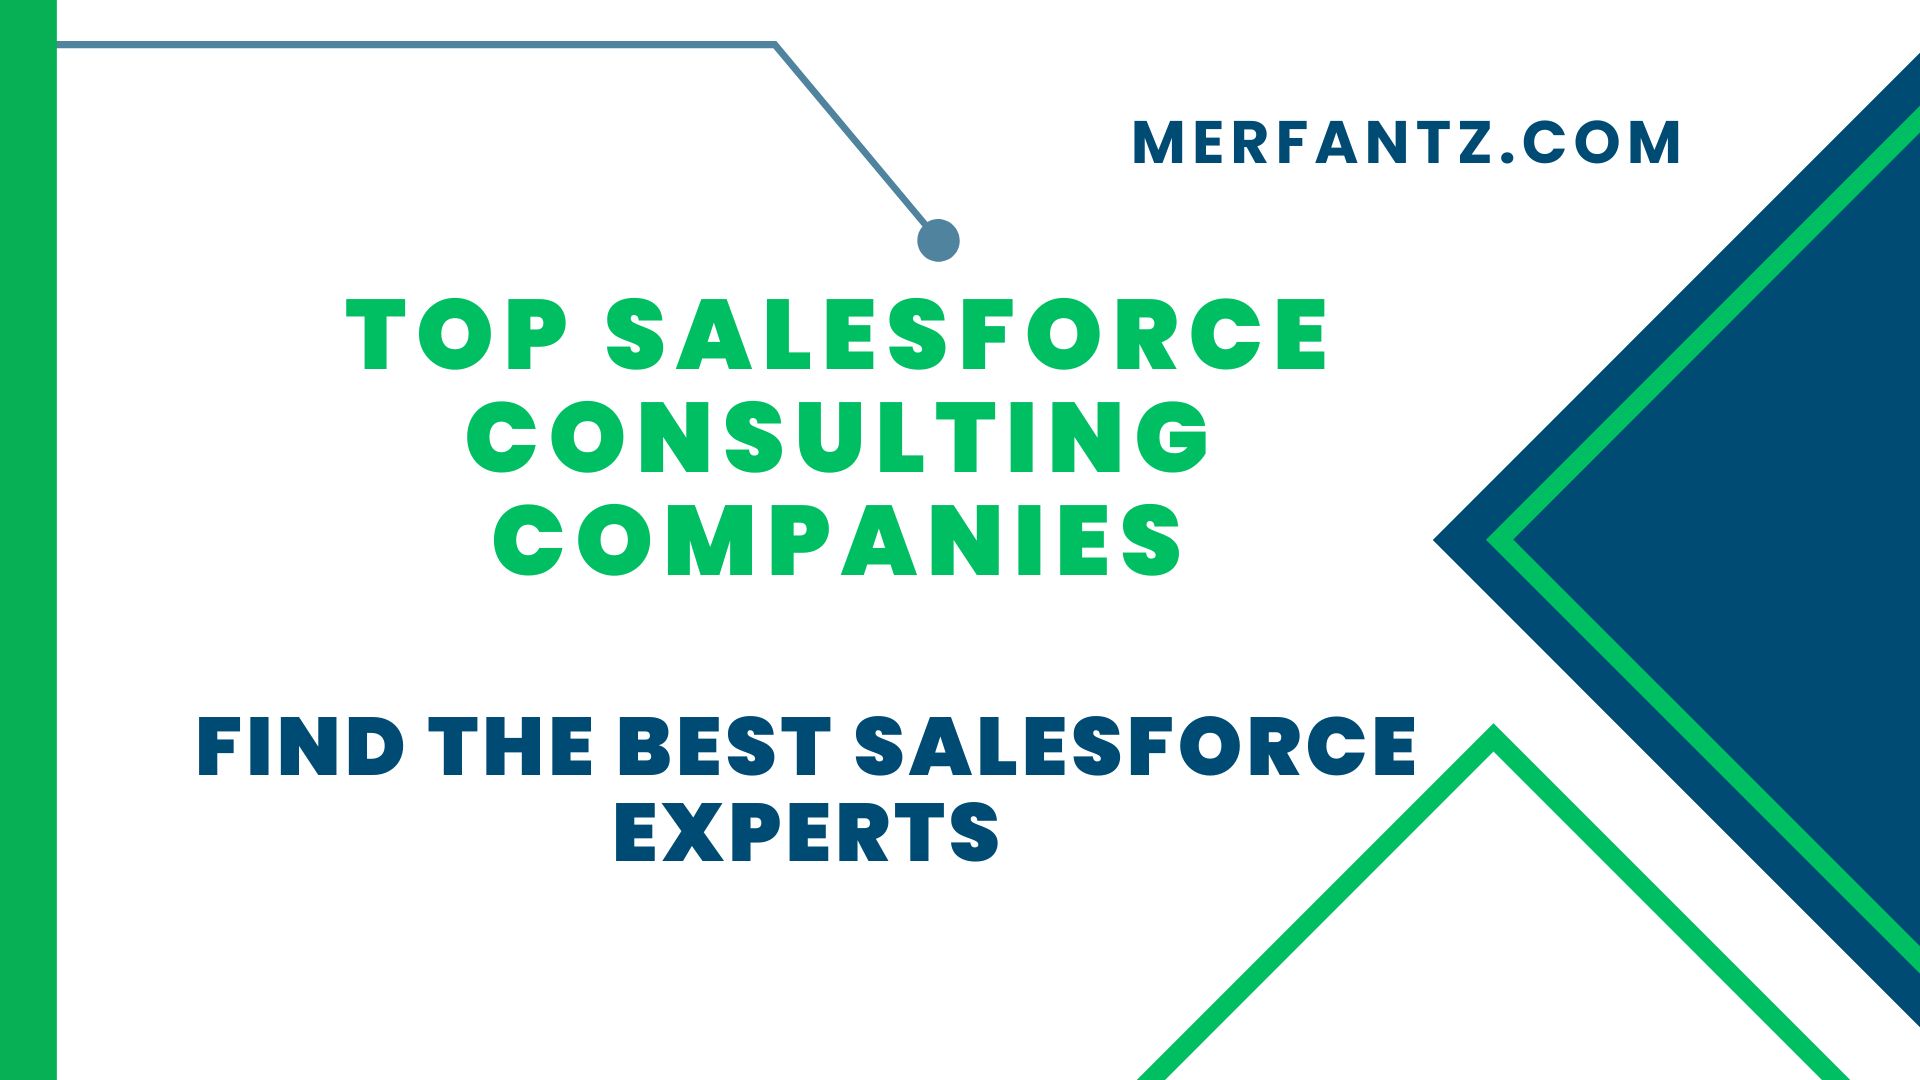 Top Salesforce Consulting Companies | Find the Best Salesforce Experts